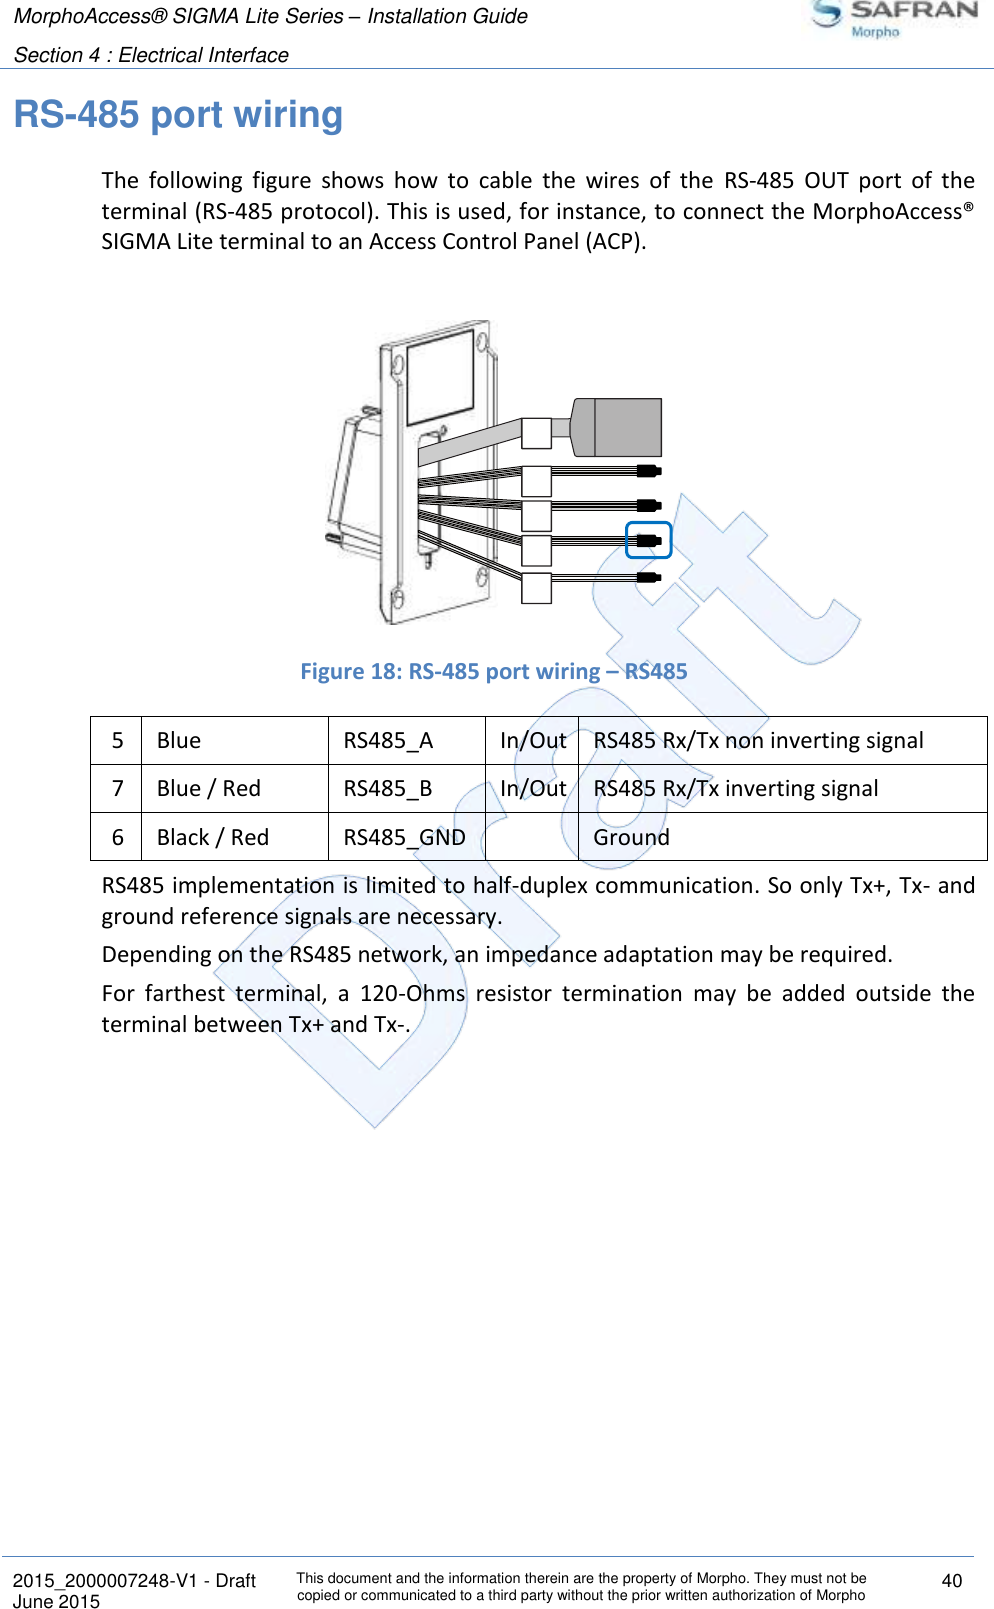 MorphoAccess® SIGMA Lite Series – Installation Guide  Section 4 : Electrical Interface   2015_2000007248-V1 - Draft This document and the information therein are the property of Morpho. They must not be copied or communicated to a third party without the prior written authorization of Morpho 40 June 2015   RS-485 port wiring The  following  figure  shows  how  to  cable  the  wires  of  the  RS-485  OUT  port  of  the terminal (RS-485 protocol). This is used, for instance, to connect the MorphoAccess® SIGMA Lite terminal to an Access Control Panel (ACP).    Figure 18: RS-485 port wiring – RS485 5 Blue RS485_A In/Out RS485 Rx/Tx non inverting signal 7 Blue / Red RS485_B In/Out RS485 Rx/Tx inverting signal 6 Black / Red RS485_GND  Ground RS485 implementation is limited to half-duplex communication. So only Tx+, Tx- and ground reference signals are necessary. Depending on the RS485 network, an impedance adaptation may be required. For  farthest  terminal,  a  120-Ohms  resistor  termination  may  be  added  outside  the terminal between Tx+ and Tx-.   